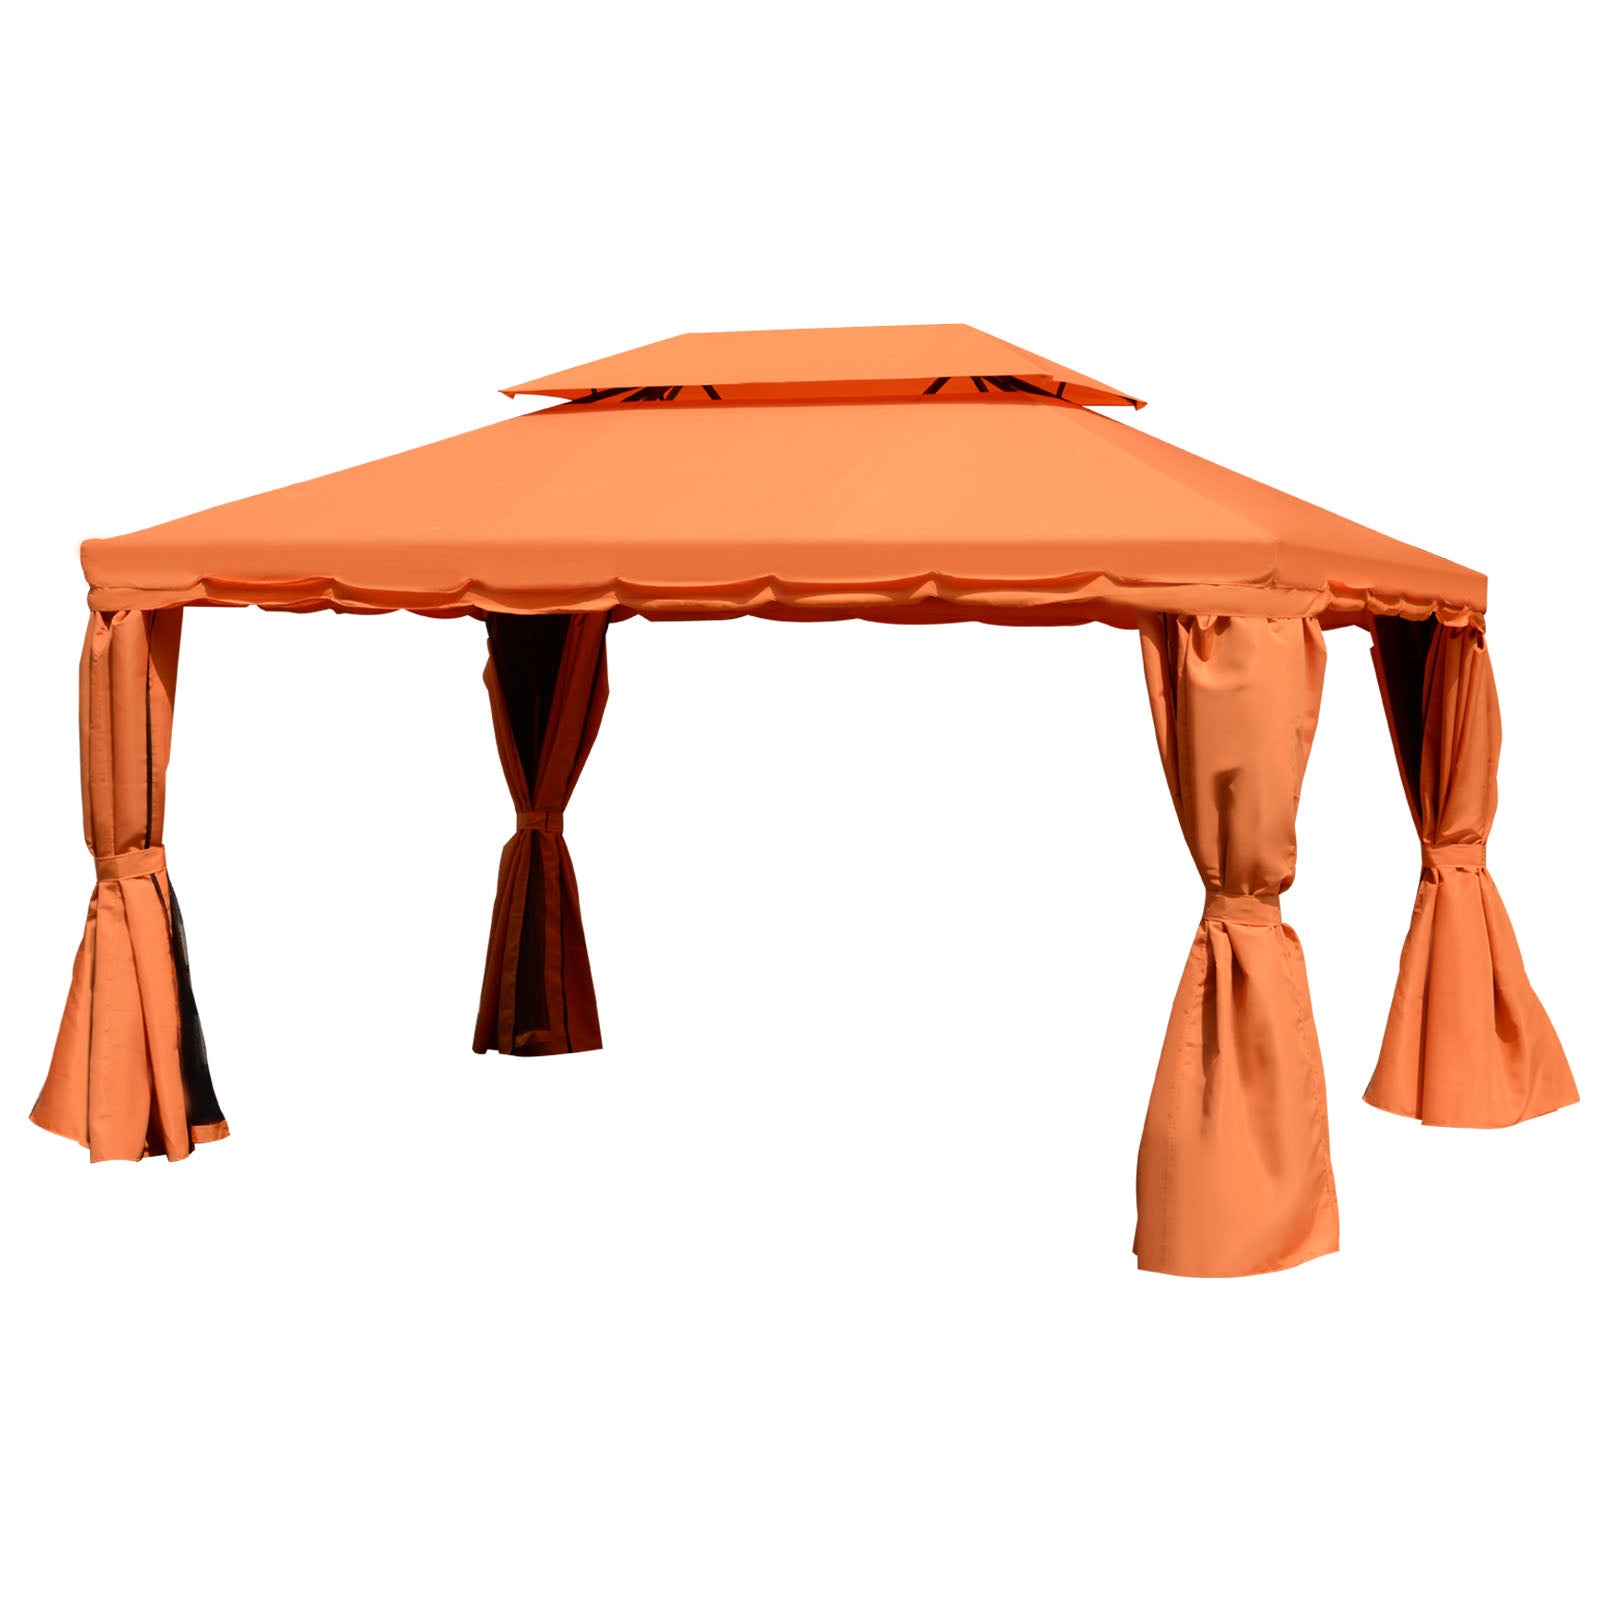 3 x 4 m Aluminium Metal Gazebo Marquee Canopy Pavilion Patio Garden Party Tent Shelter with Nets and Sidewalls - Orange-0